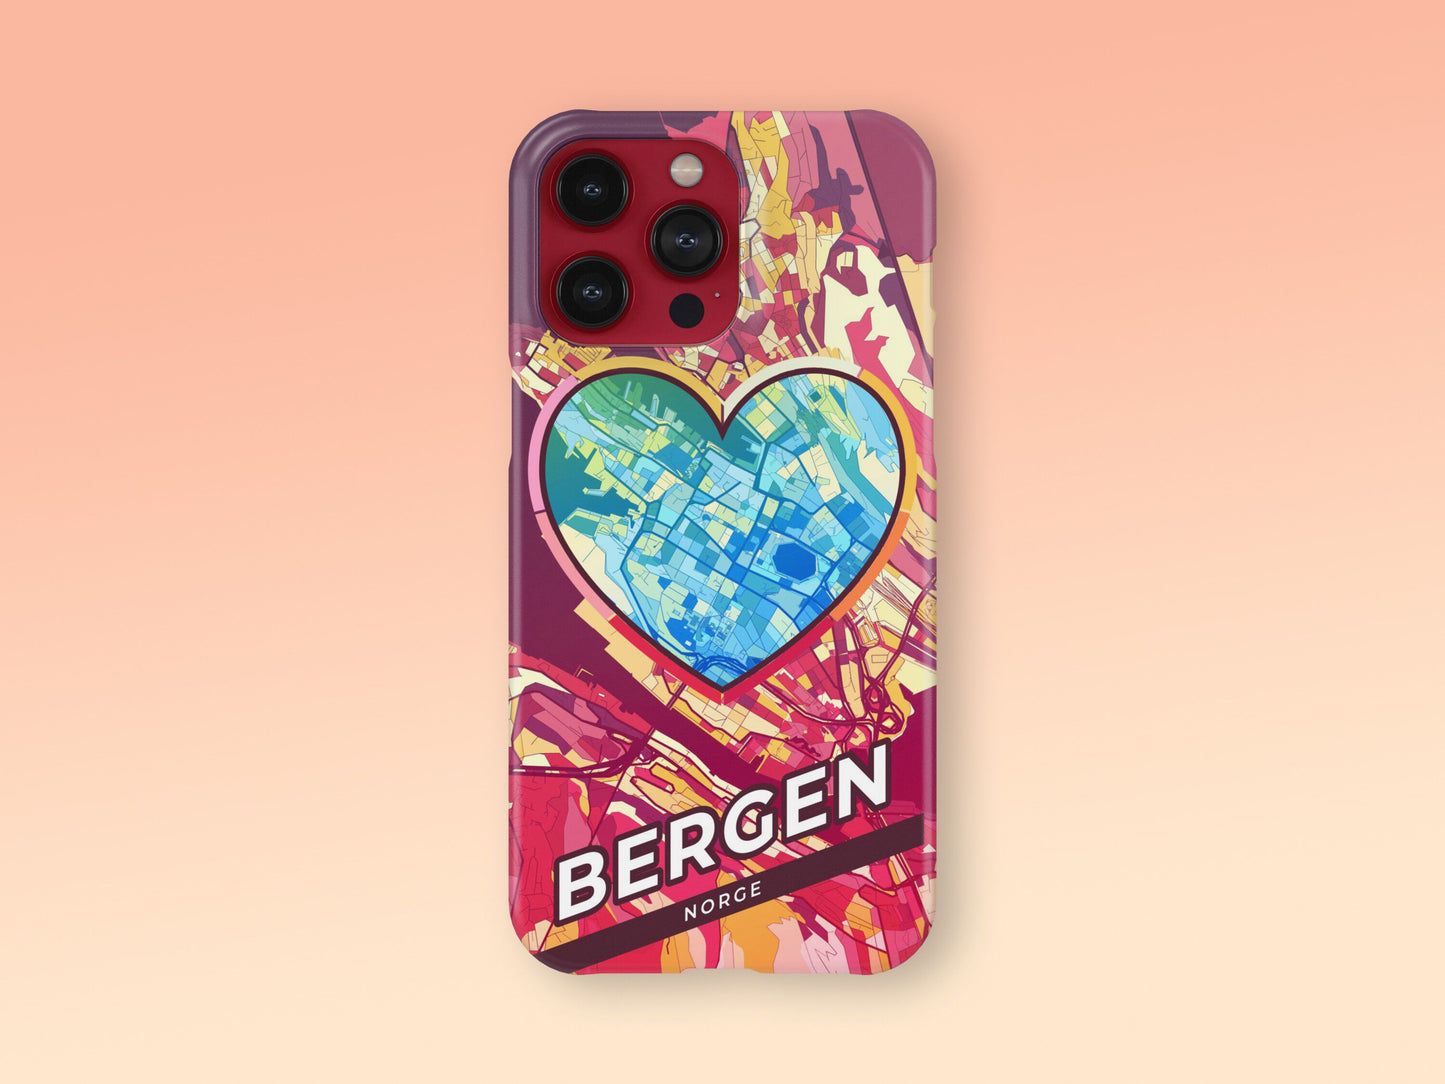 Bergen Norway slim phone case with colorful icon. Birthday, wedding or housewarming gift. Couple match cases. 2